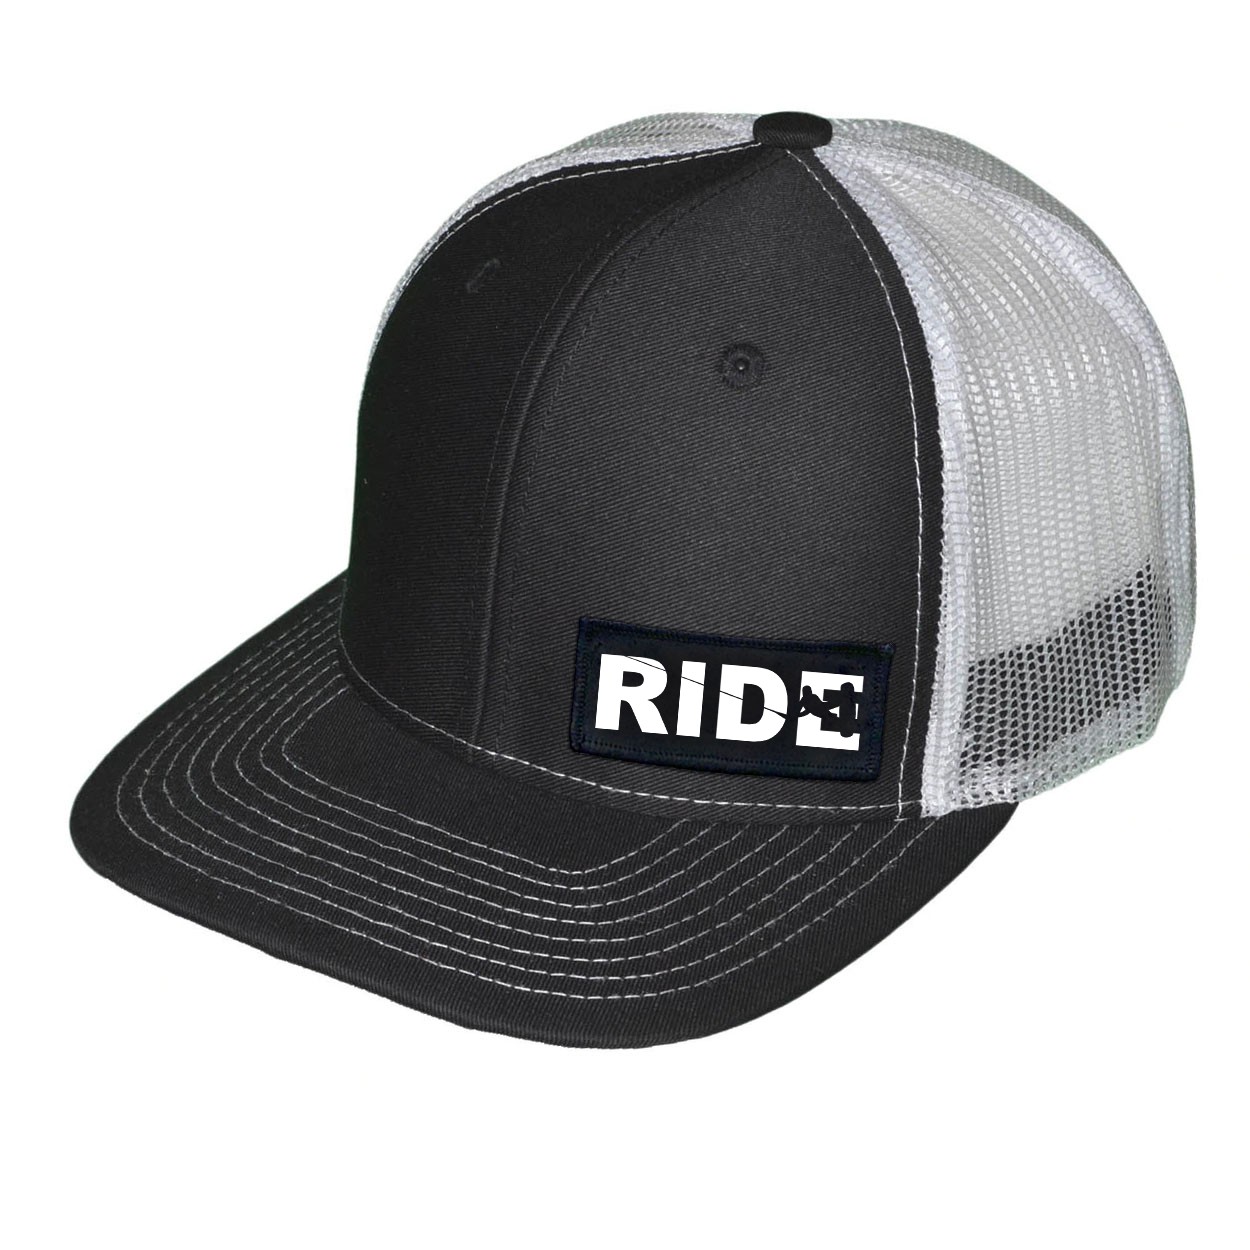 Ride Wakeboard Logo Night Out Woven Patch Snapback Trucker Hat Black/White (White Logo)